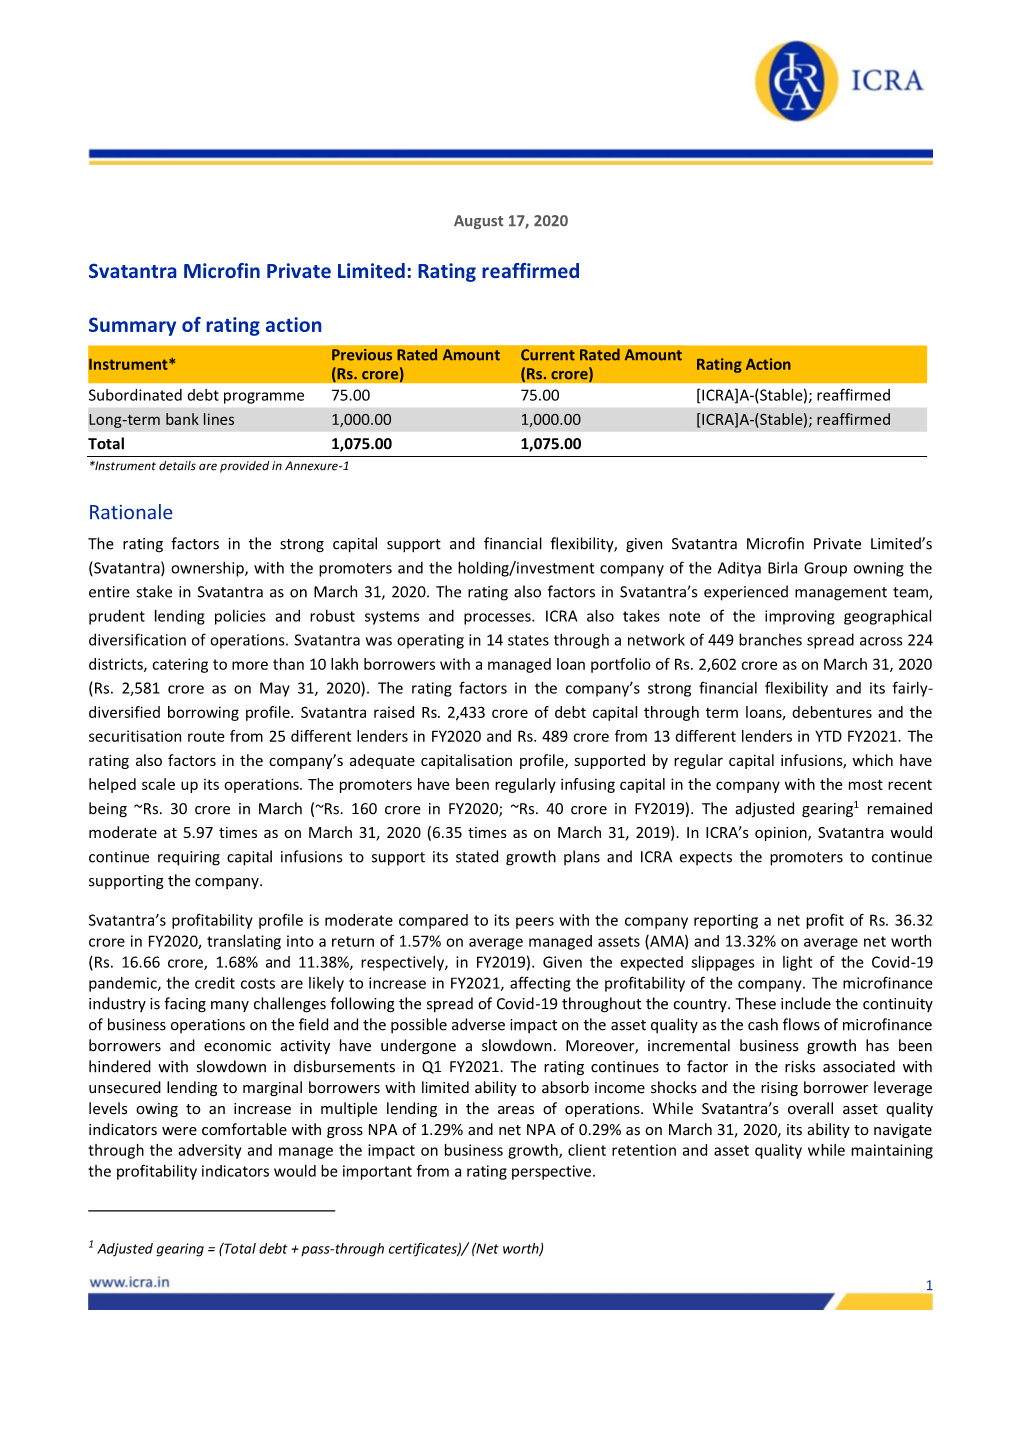 Svatantra Microfin Private Limited: Rating Reaffirmed